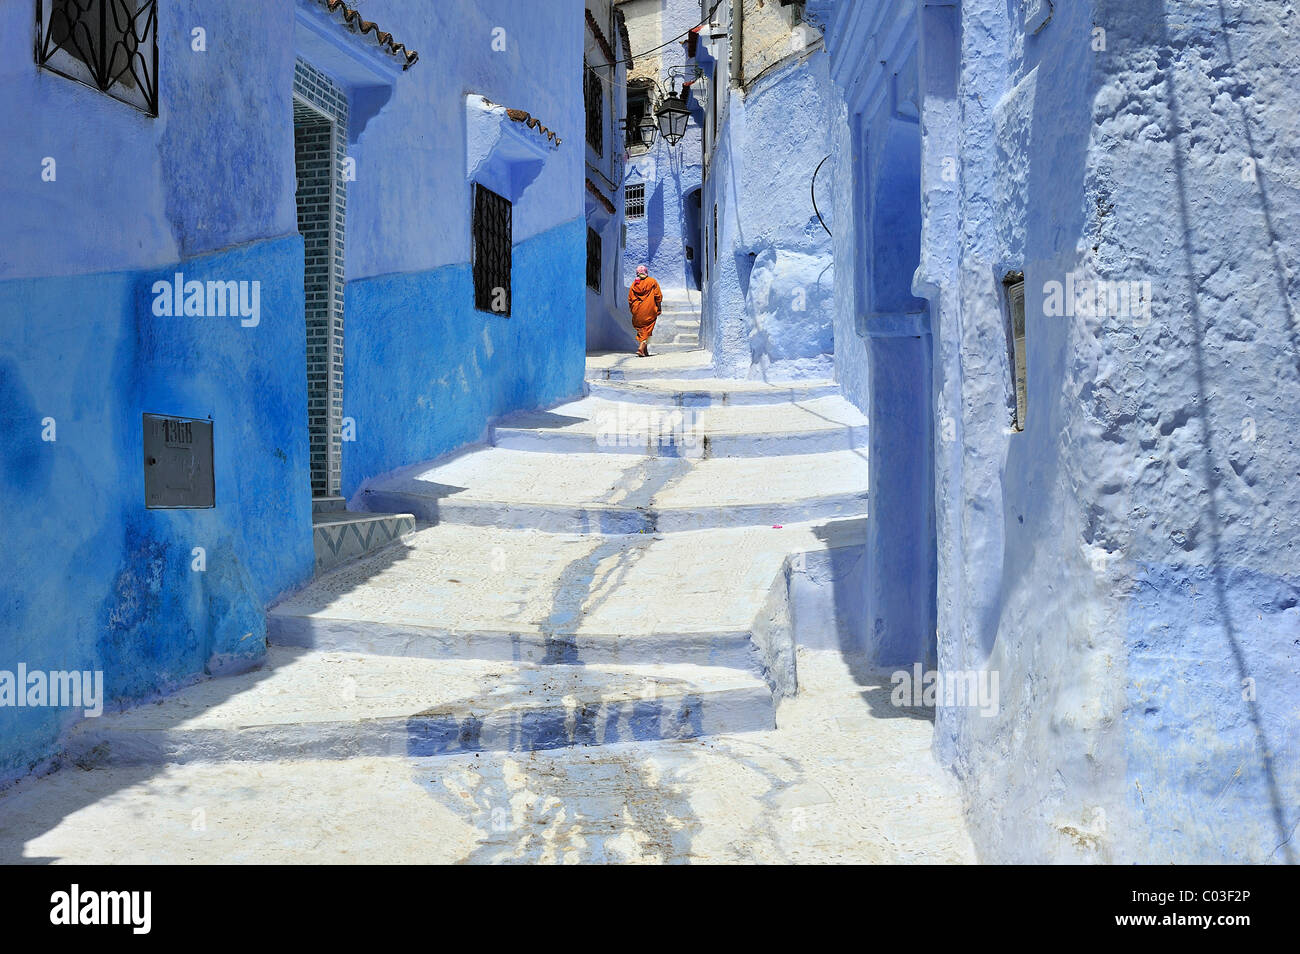 A woman walking in an alleyway painted blue in the medina of Chefchaouen, Morocco, Africa Stock Photo